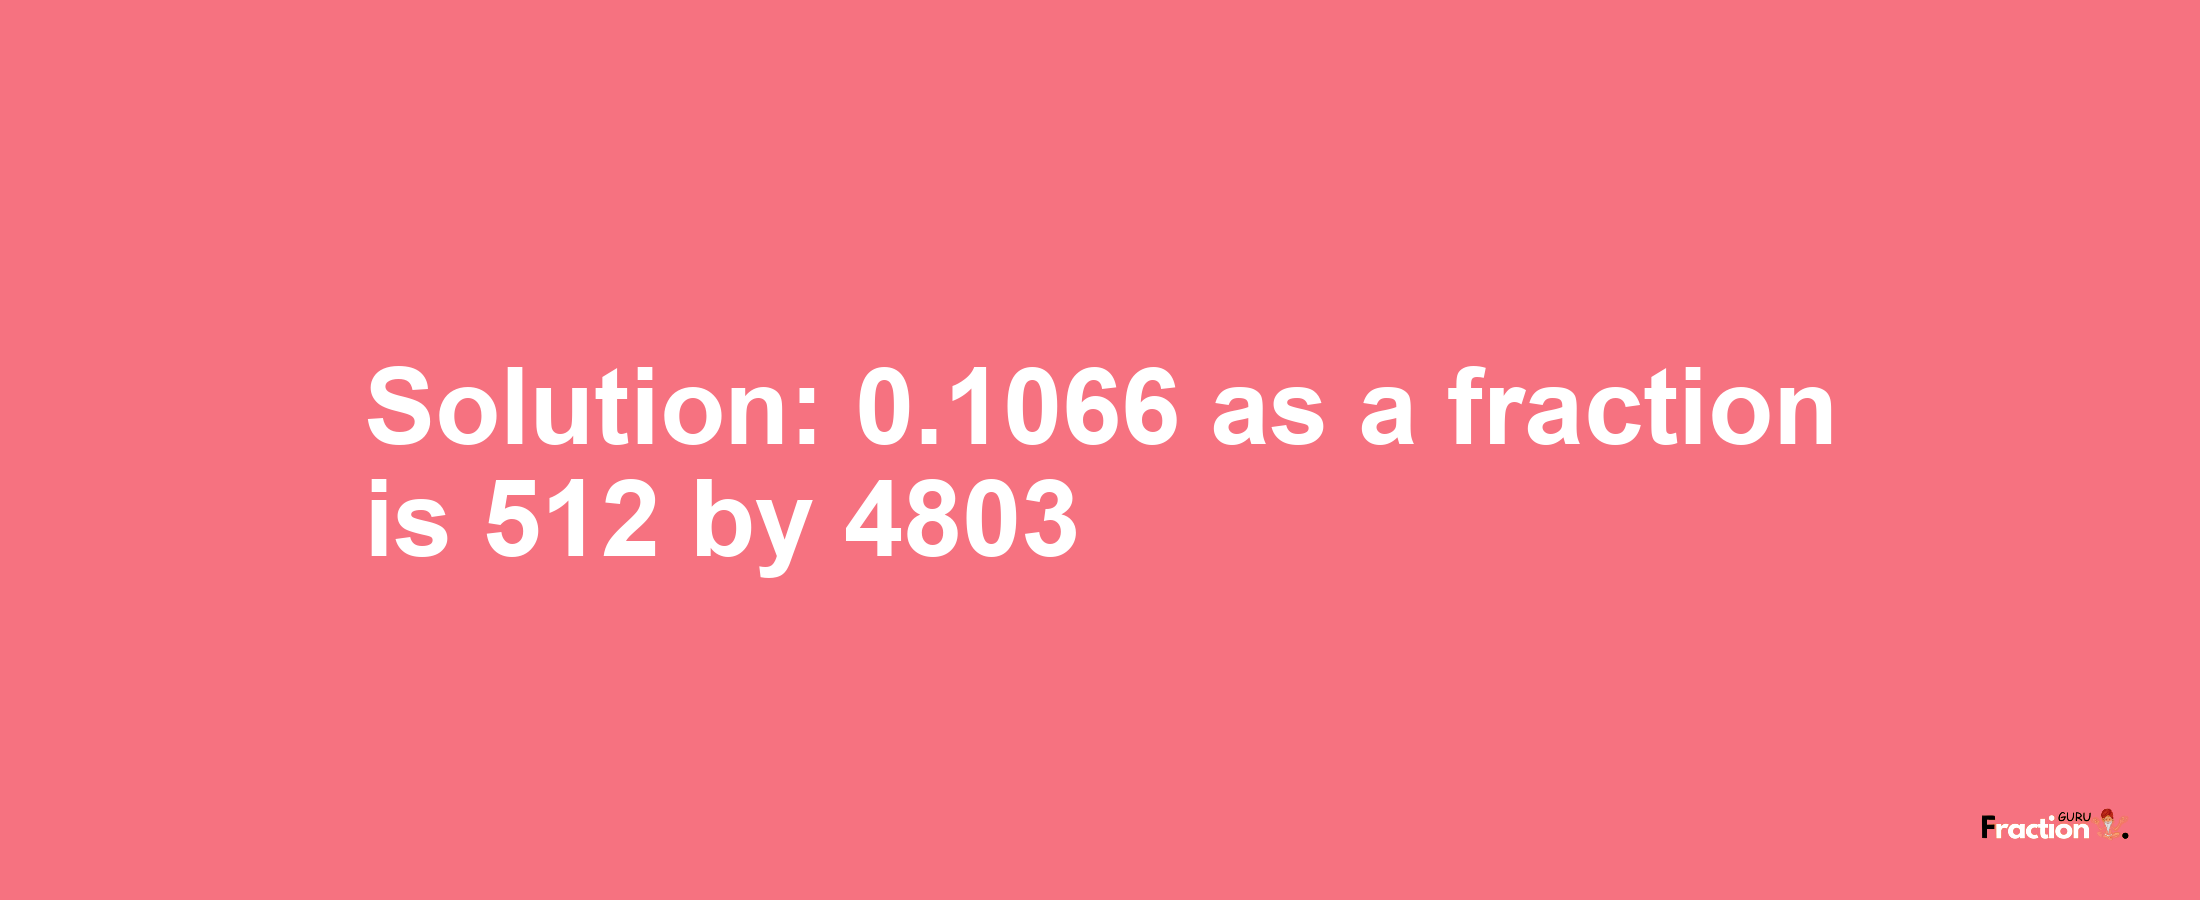 Solution:0.1066 as a fraction is 512/4803